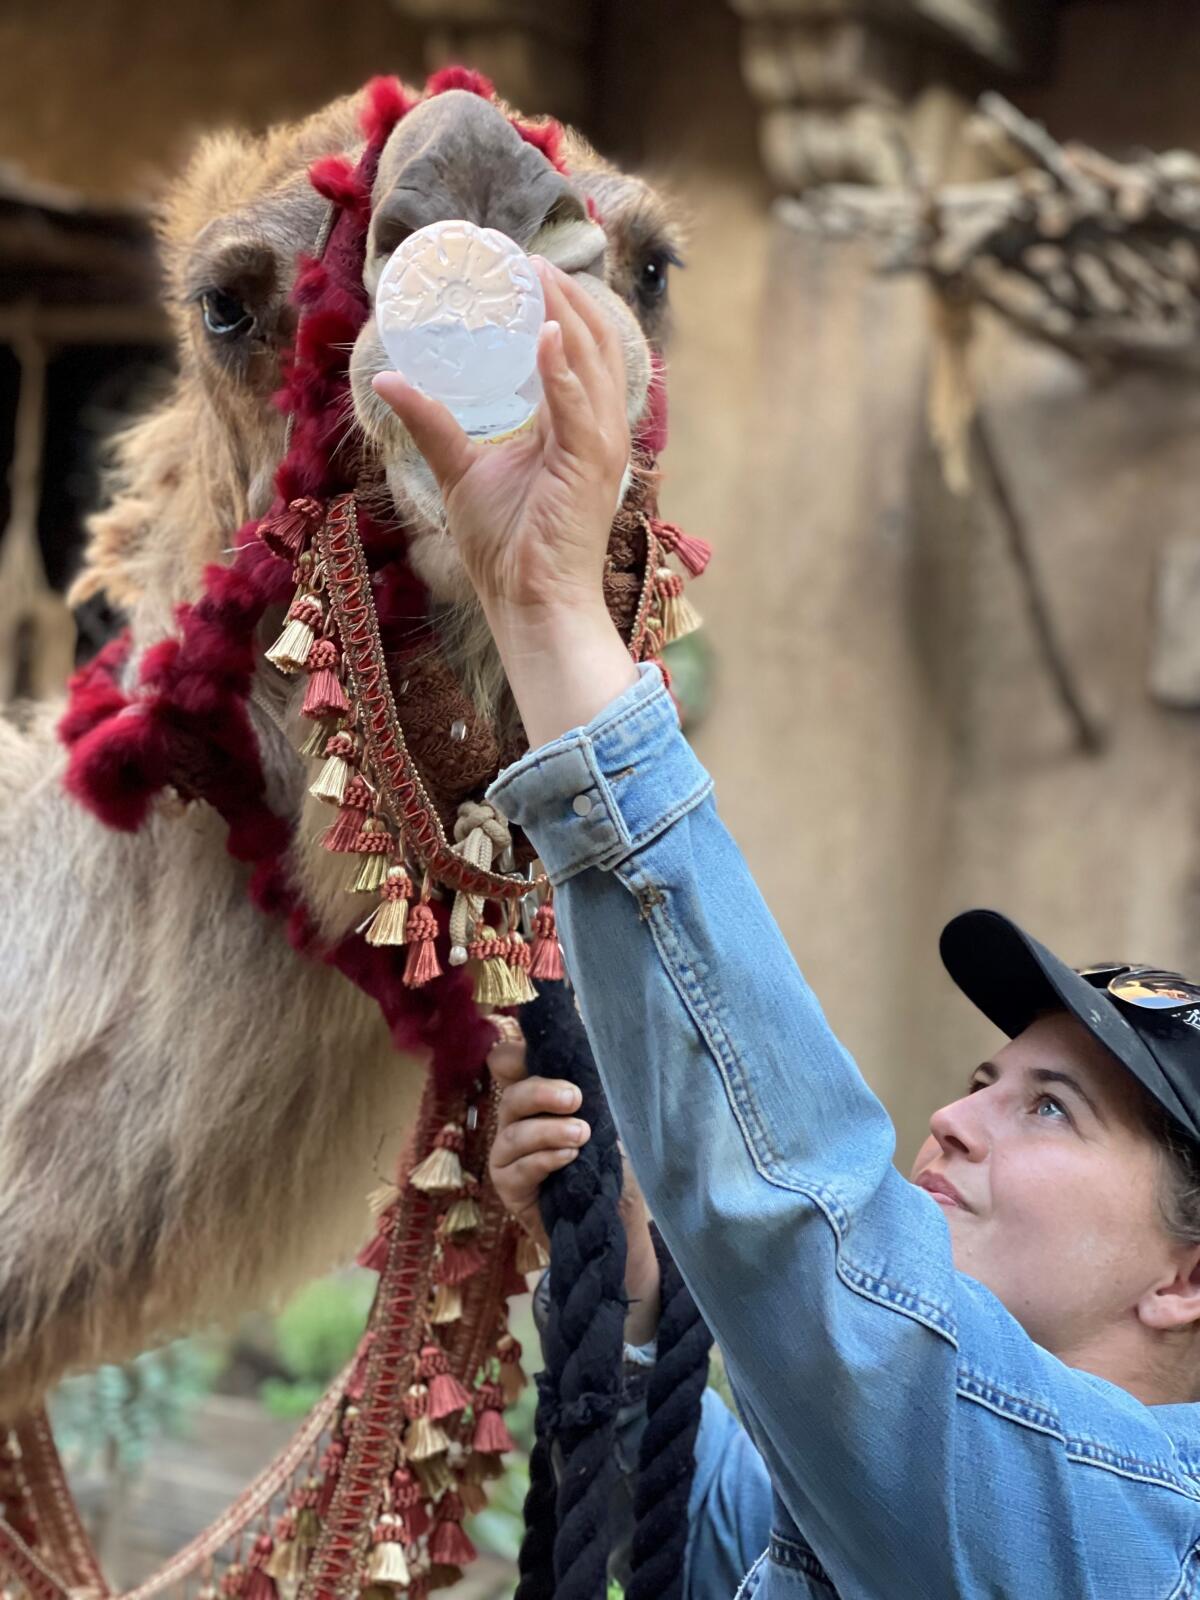 Tricia Krussow giving a camel a bottle of water.